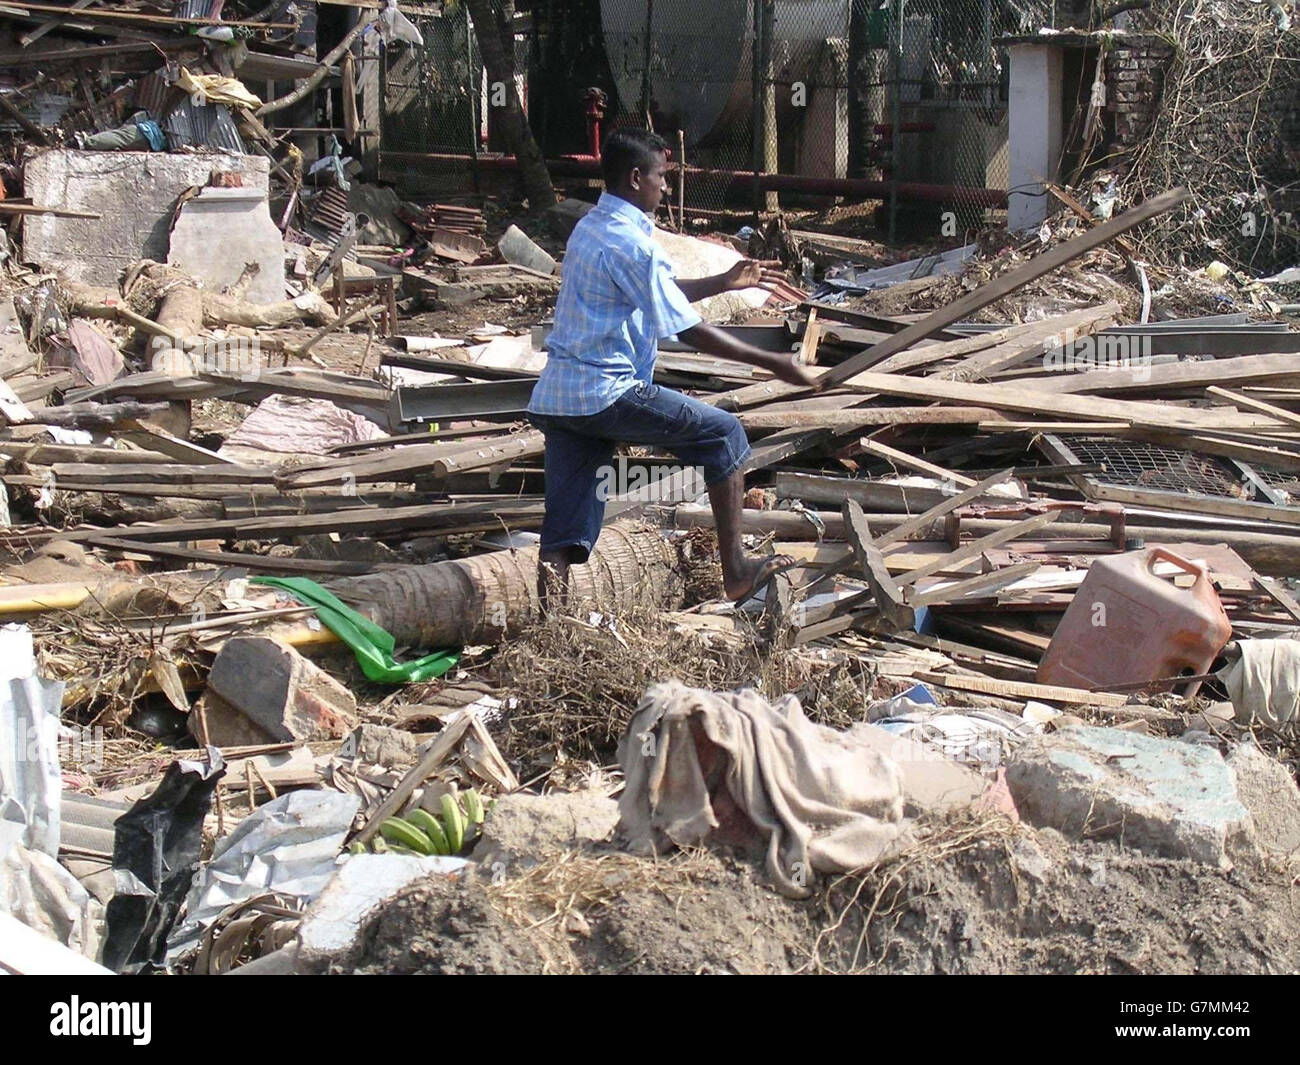 The clearing-up process has begun in Galle, southern Sri Lanka where local people have been removing debris. Stock Photo